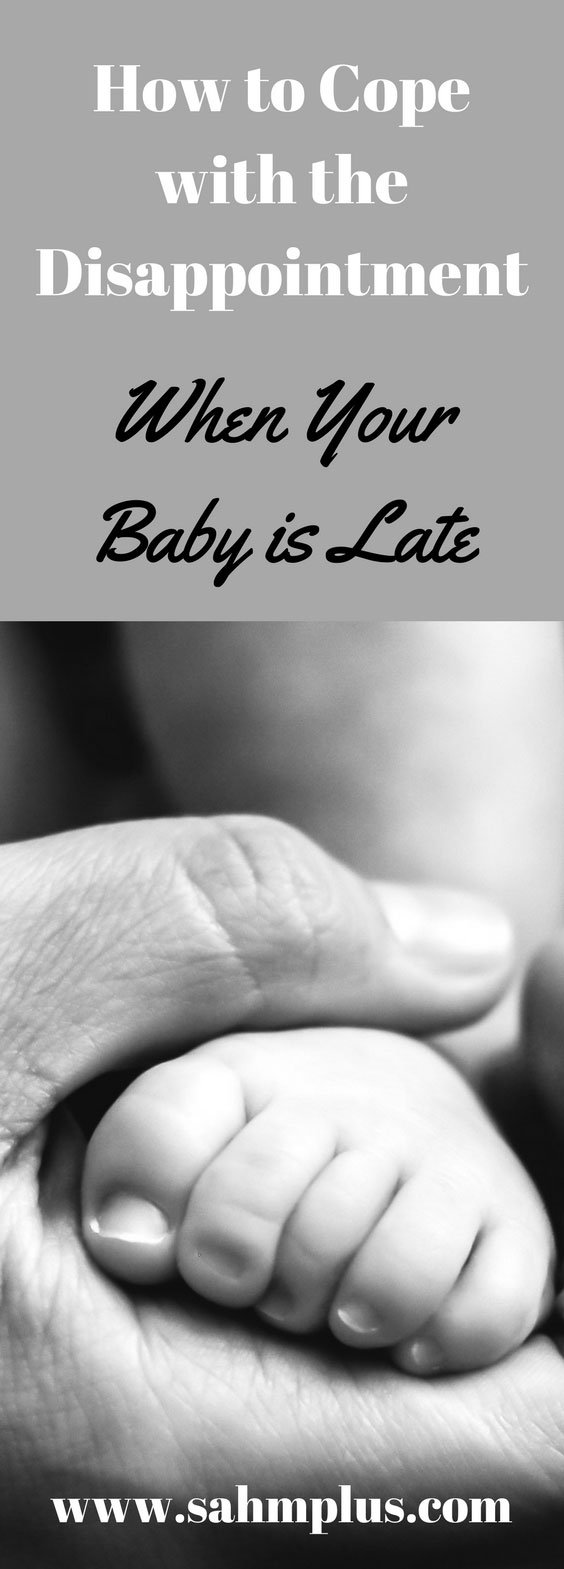 How to cope with the disappointment when your baby is late. Remember, a due date is an estimate. Baby will come when it's ready. And, handle the constant questions whatever way you need. Don't rush nature! via www.sahmplus.com